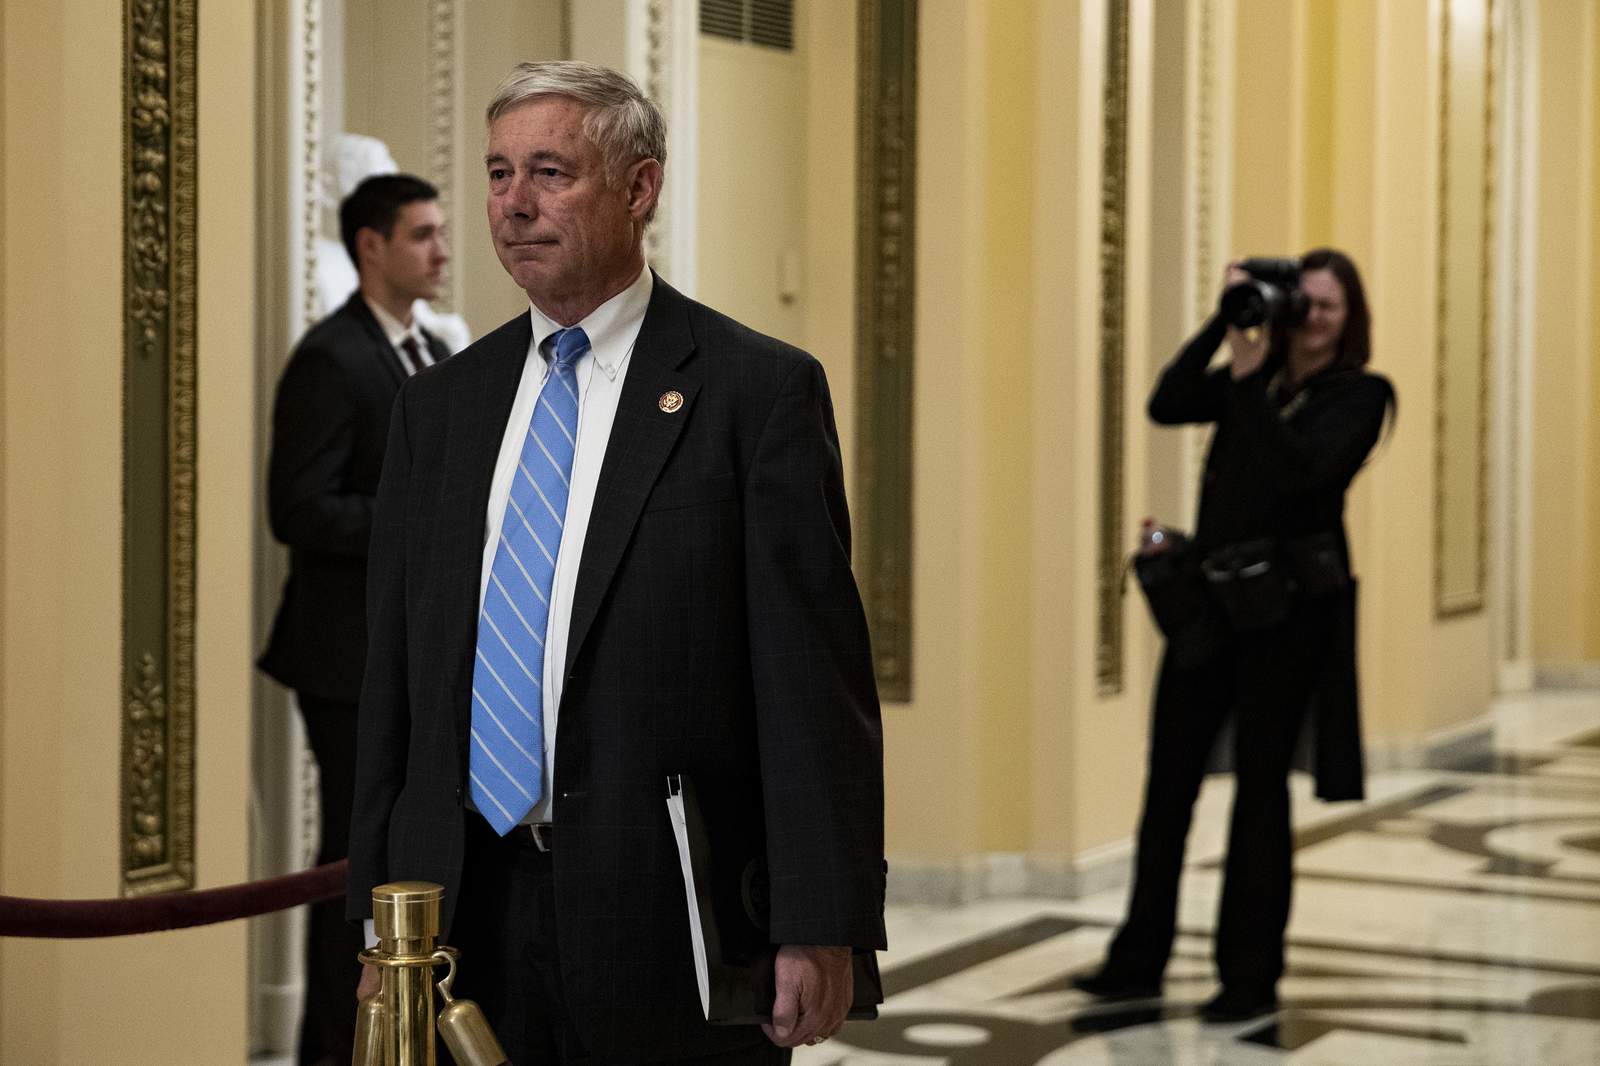 Fred Upton wins Republican nomination for U.S. House in Michigans 6th congressional district